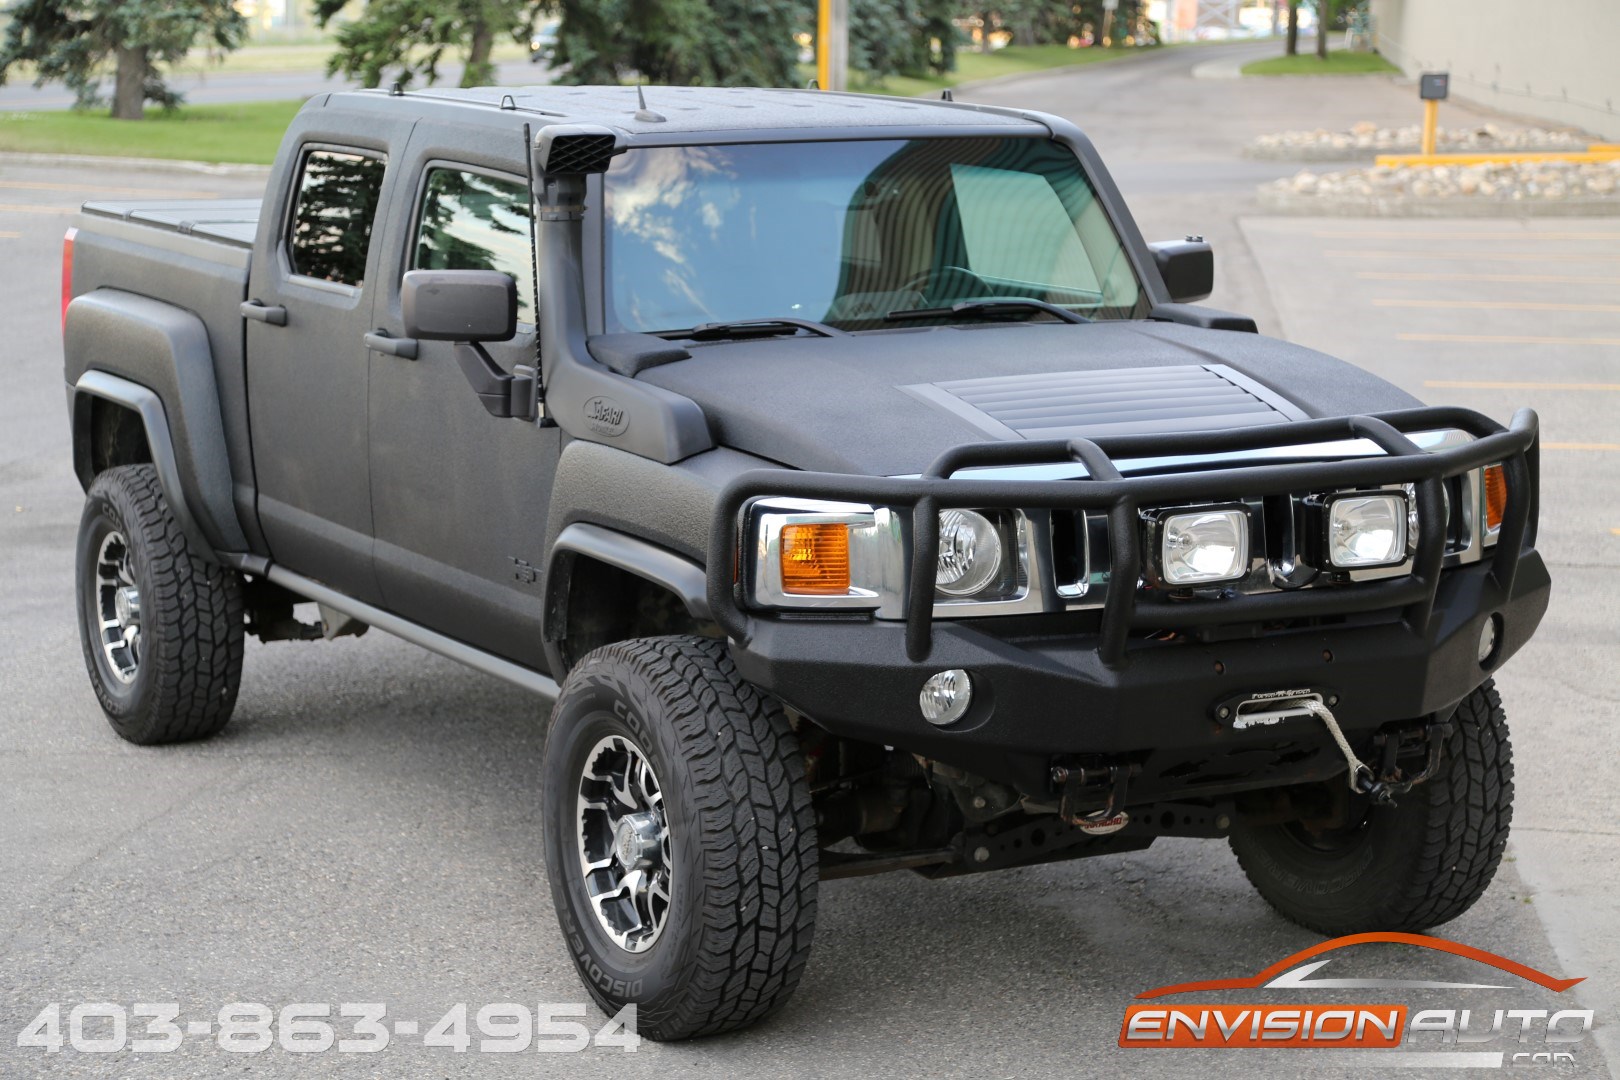 2009 Hummer H3T Truck – Offroad Package – Lifted – 5 Speed Manual - Envision Auto